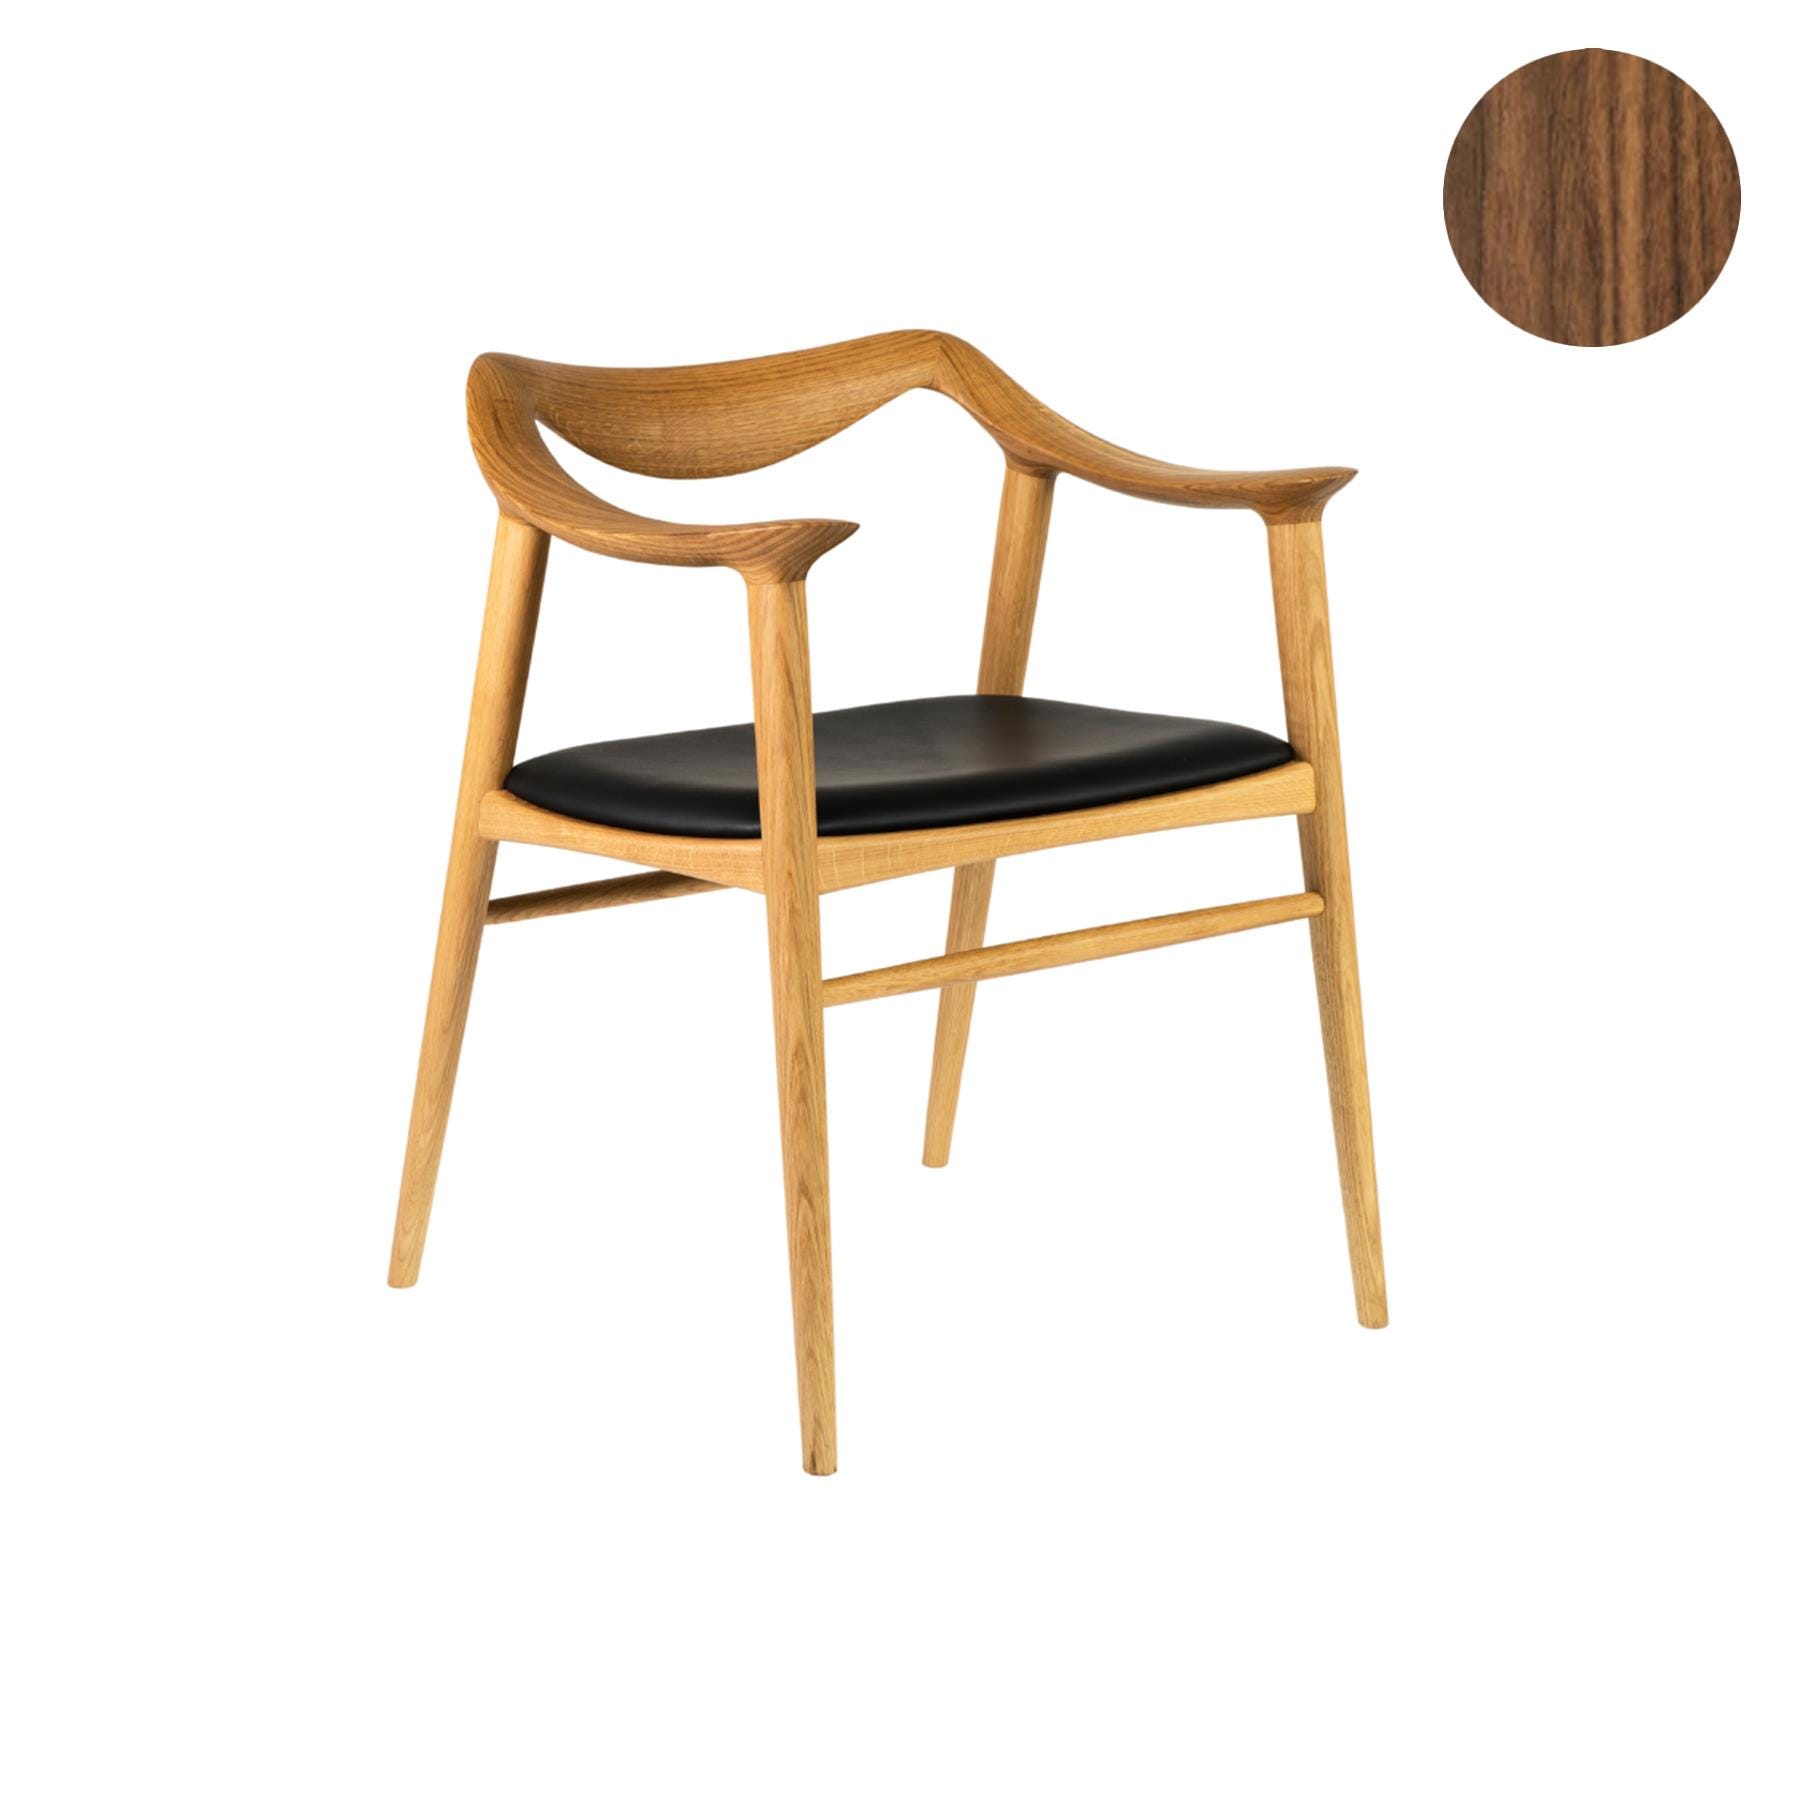 Fjordfiesta Bambi 573 Dining Chair Walnut Black Leather Designer Furniture From Holloways Of Ludlow